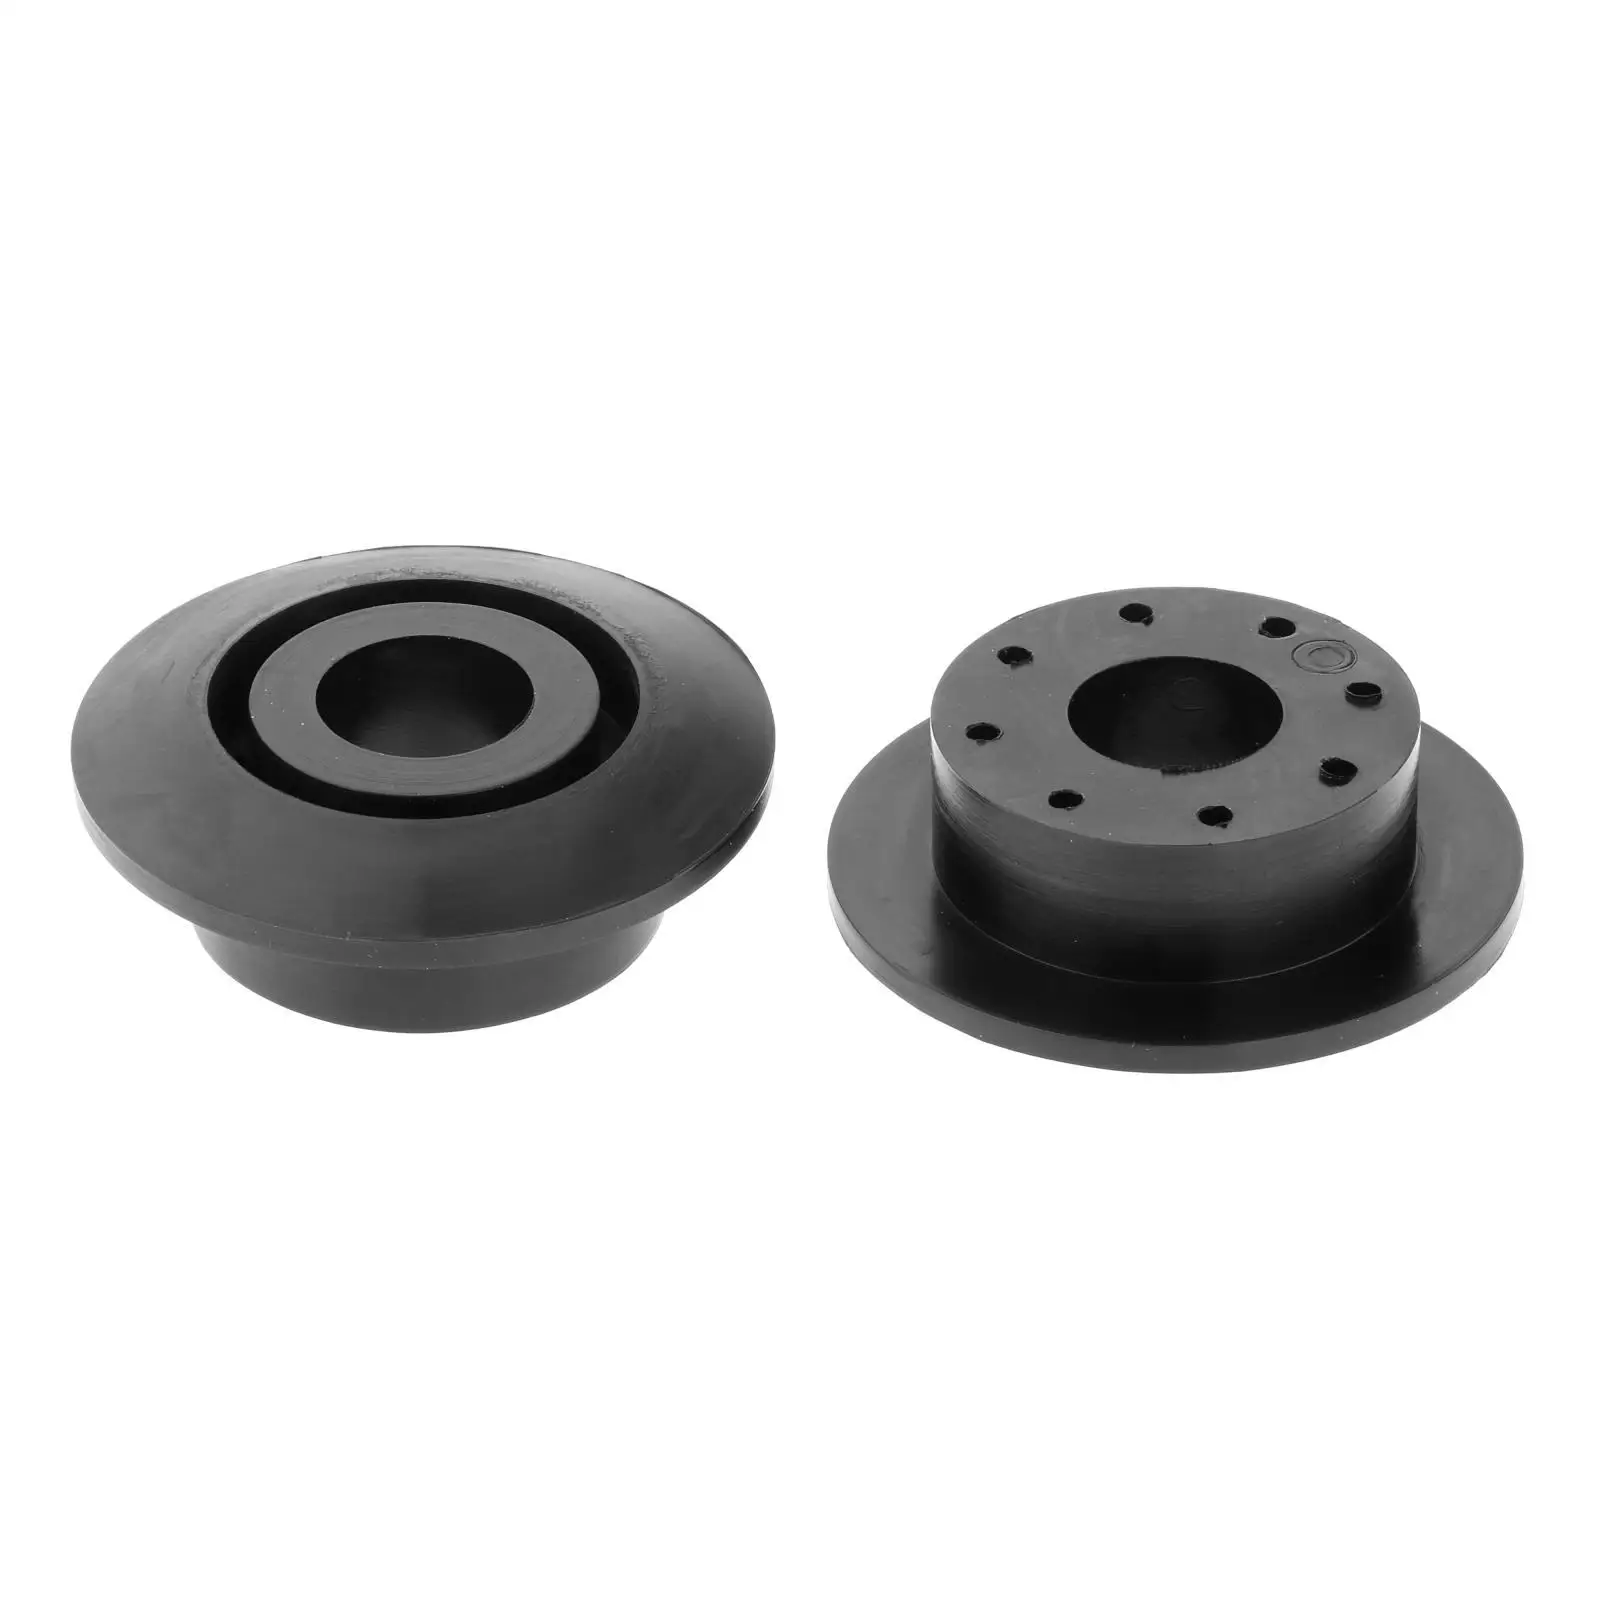 Solid Rear Differential Mount Bushing Kdt911 for Nissan 350Z 370Z G35 G37 Differentials Assemblies Parts